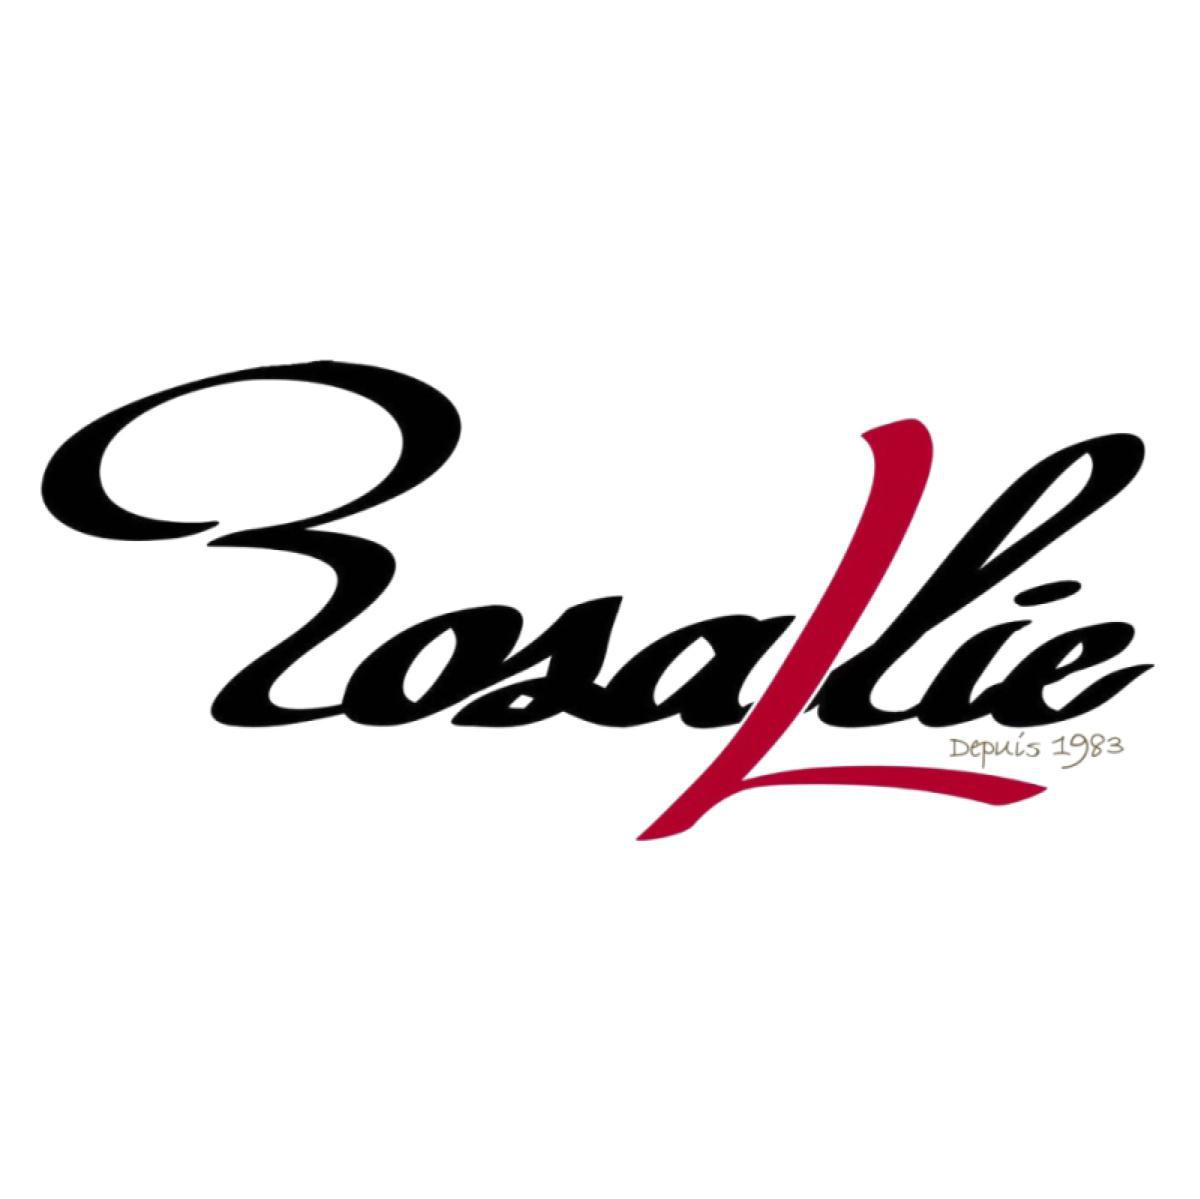 Rosallie Le French Cafe